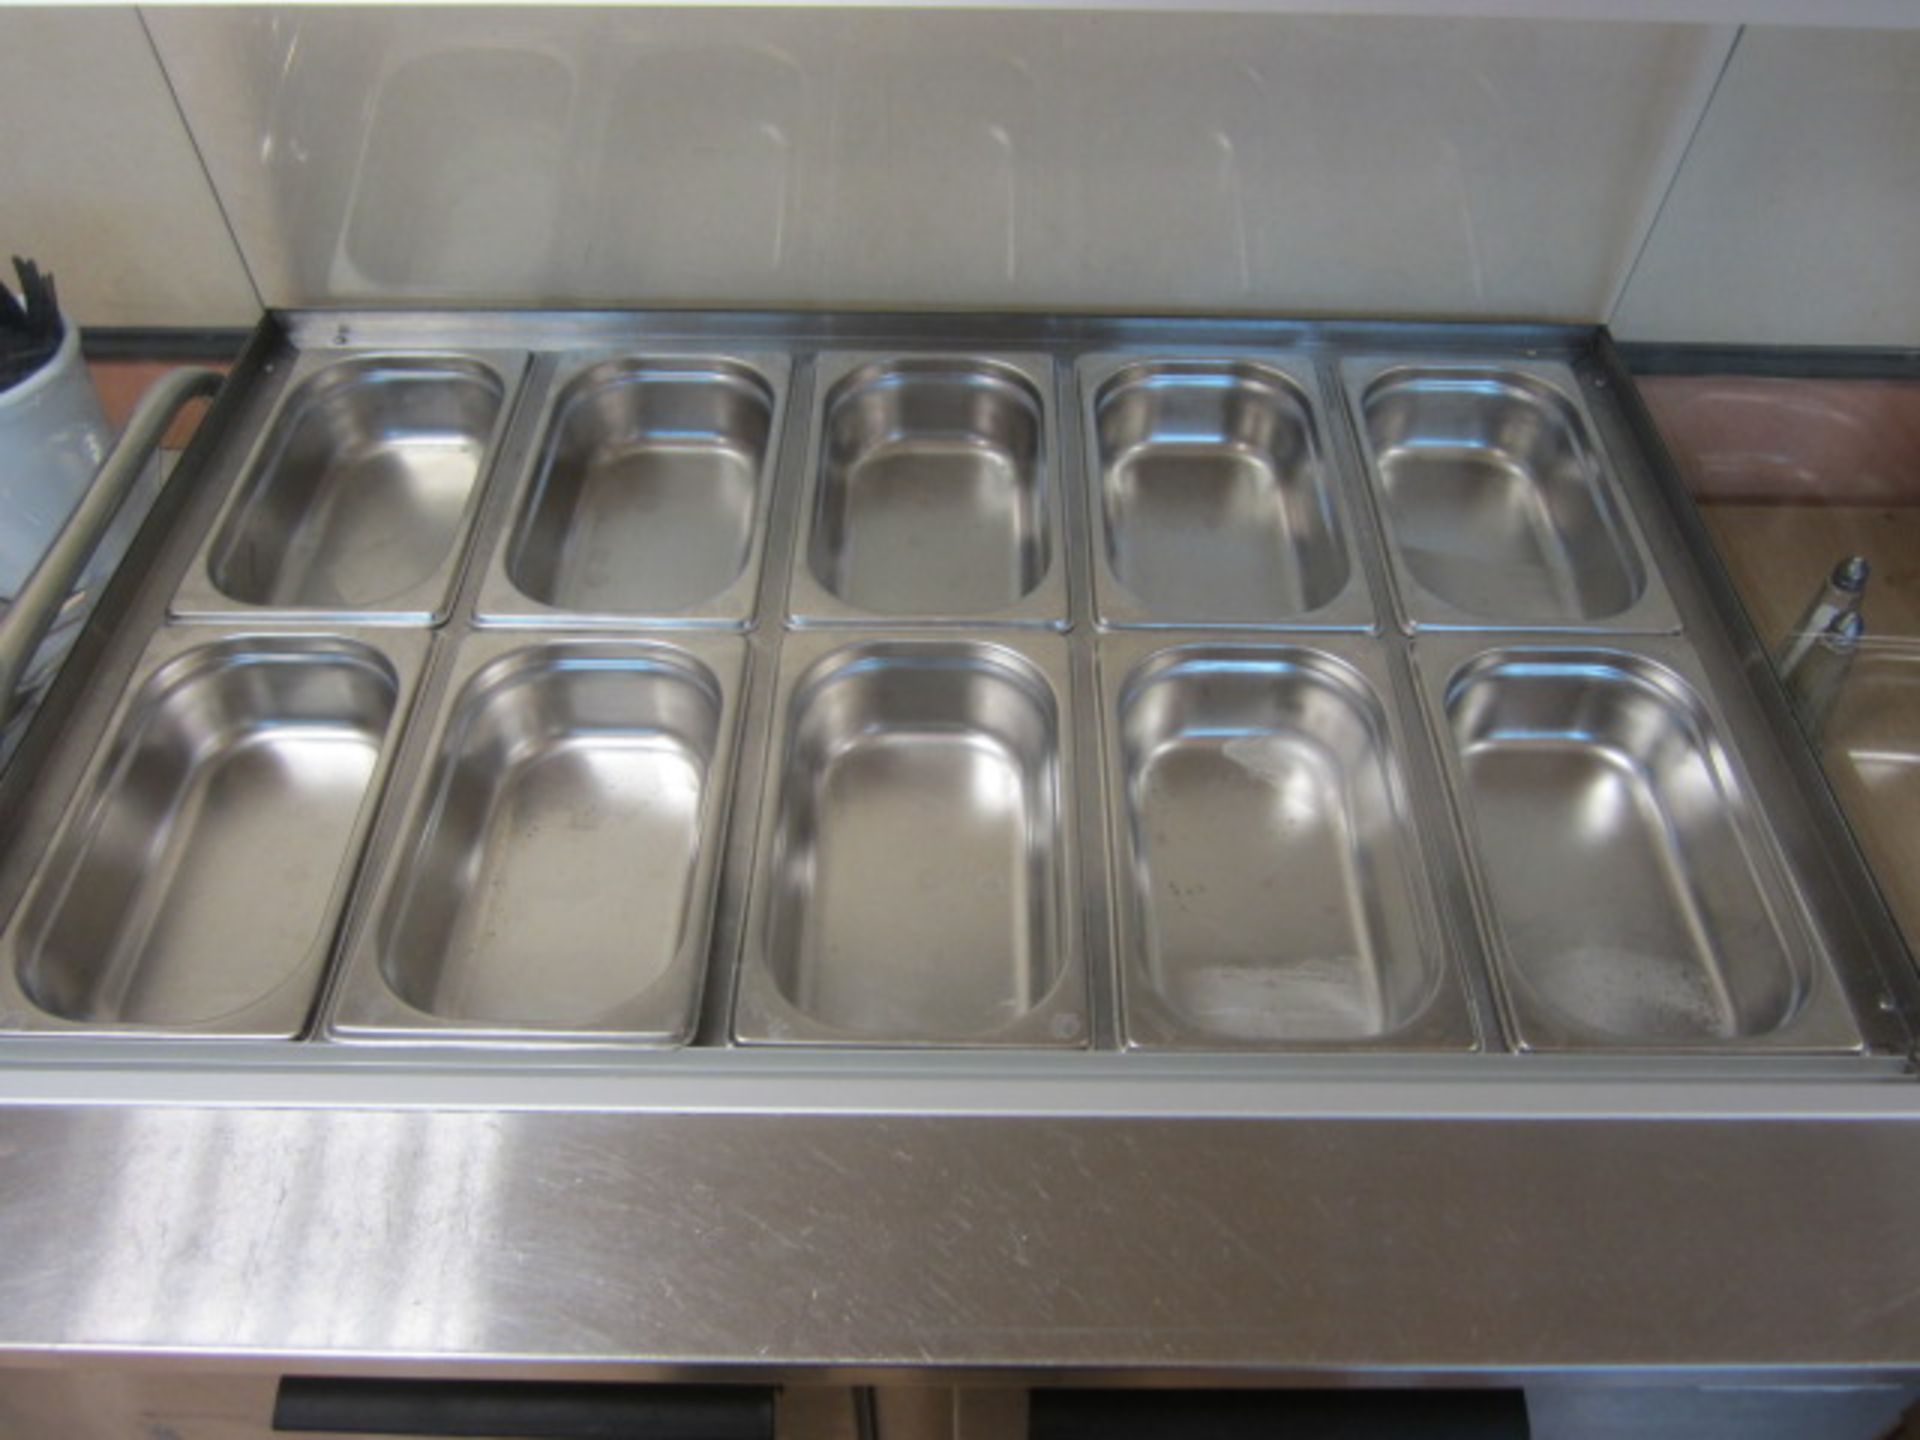 Igloo 10 section stainless steel salad counter, type Ibiza 0.9, serial no. NS-092997, partial glazed - Image 2 of 5